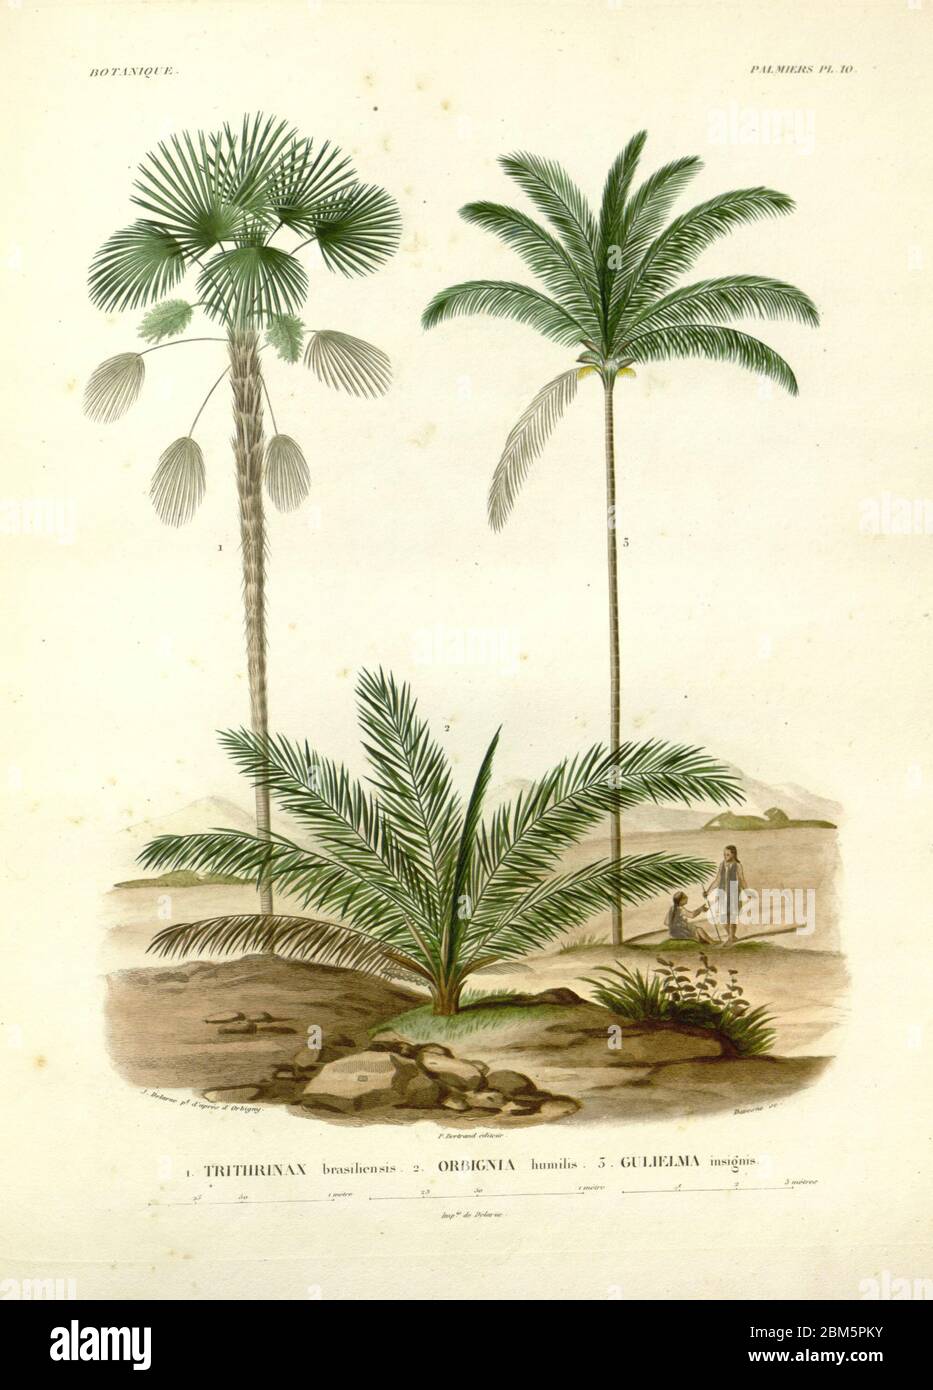 Palm trees and indigenous people of South America From the book 'Voyage dans l'Amérique Méridionale' [Journey to South America: (Brazil, the eastern republic of Uruguay, the Argentine Republic, Patagonia, the republic of Chile, the republic of Bolivia, the republic of Peru), executed during the years 1826 - 1833] By: Orbigny, Alcide Dessalines d', 1802-1857; Montagne, Jean François Camille, 1784-1866; Martius, Karl Friedrich Philipp von, 1794-1868 Published Paris :Chez Pitois-Levrault et c.e ... ;1835-1847 Stock Photo